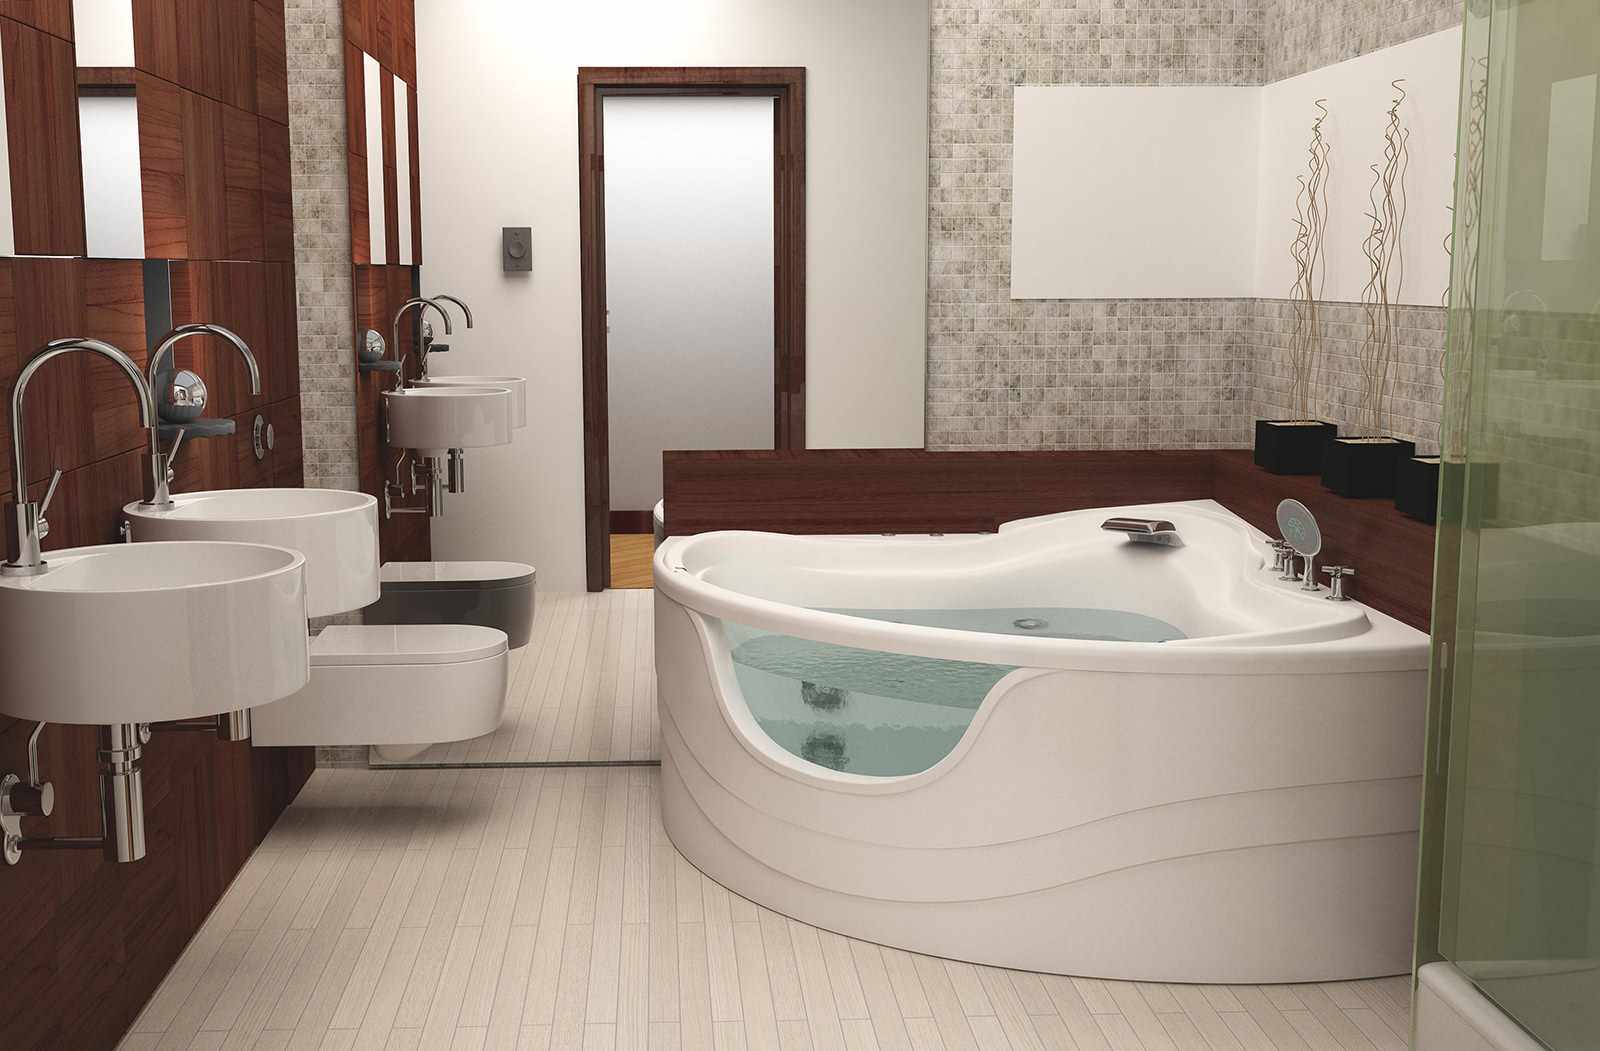 version of the unusual design of the bathroom with a corner bath